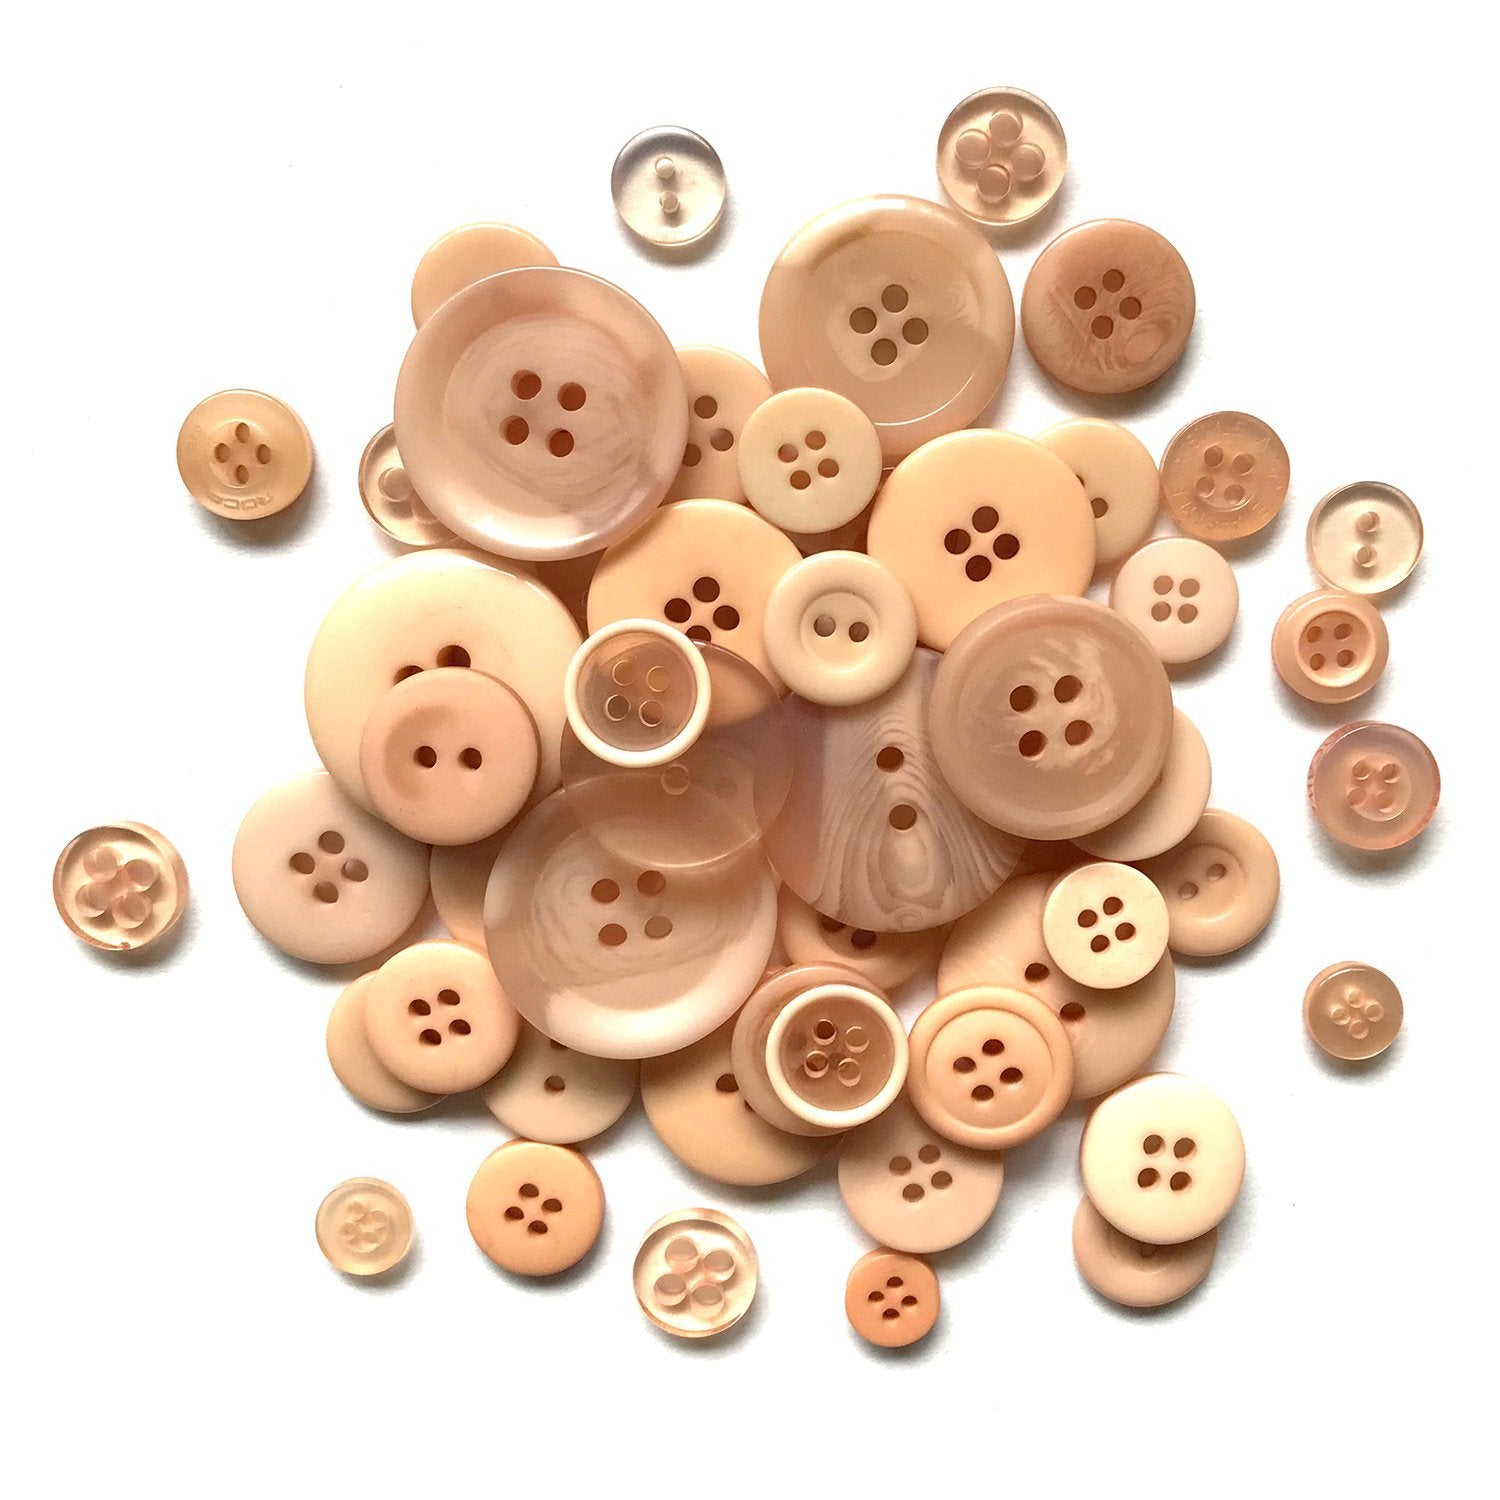 Tan - BTP726 - Buttons Galore and More